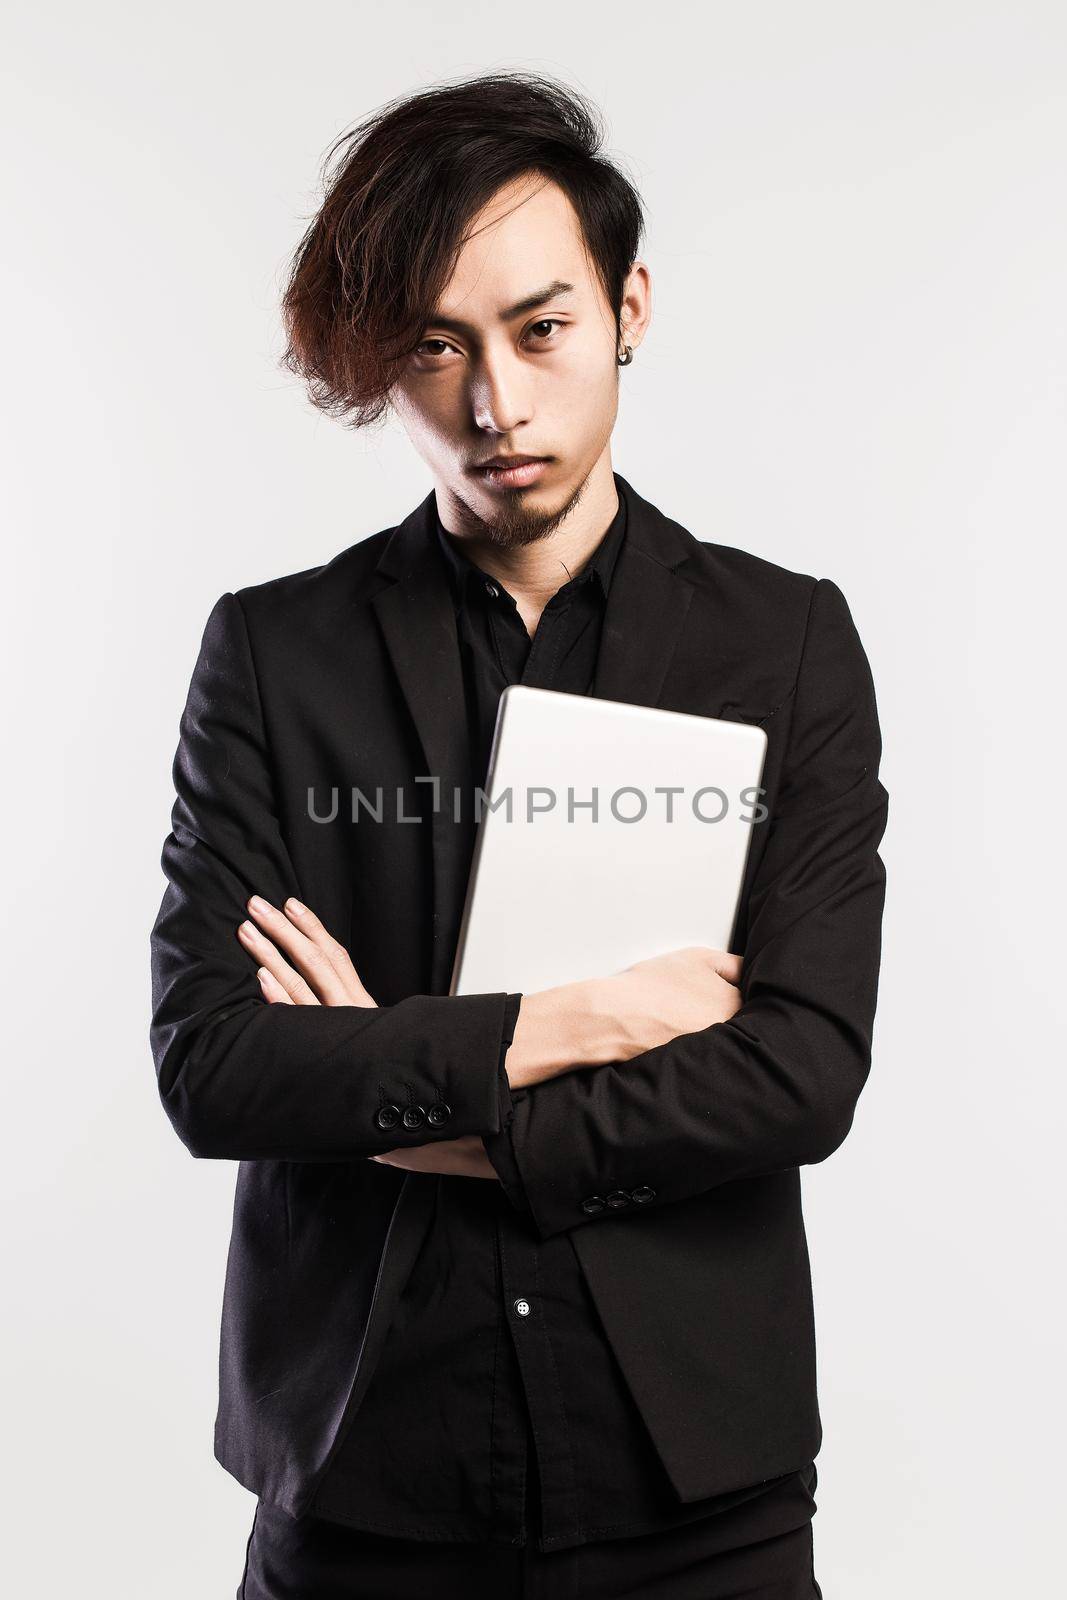 Serious young male executive using digital tablet against gray background by whatwolf